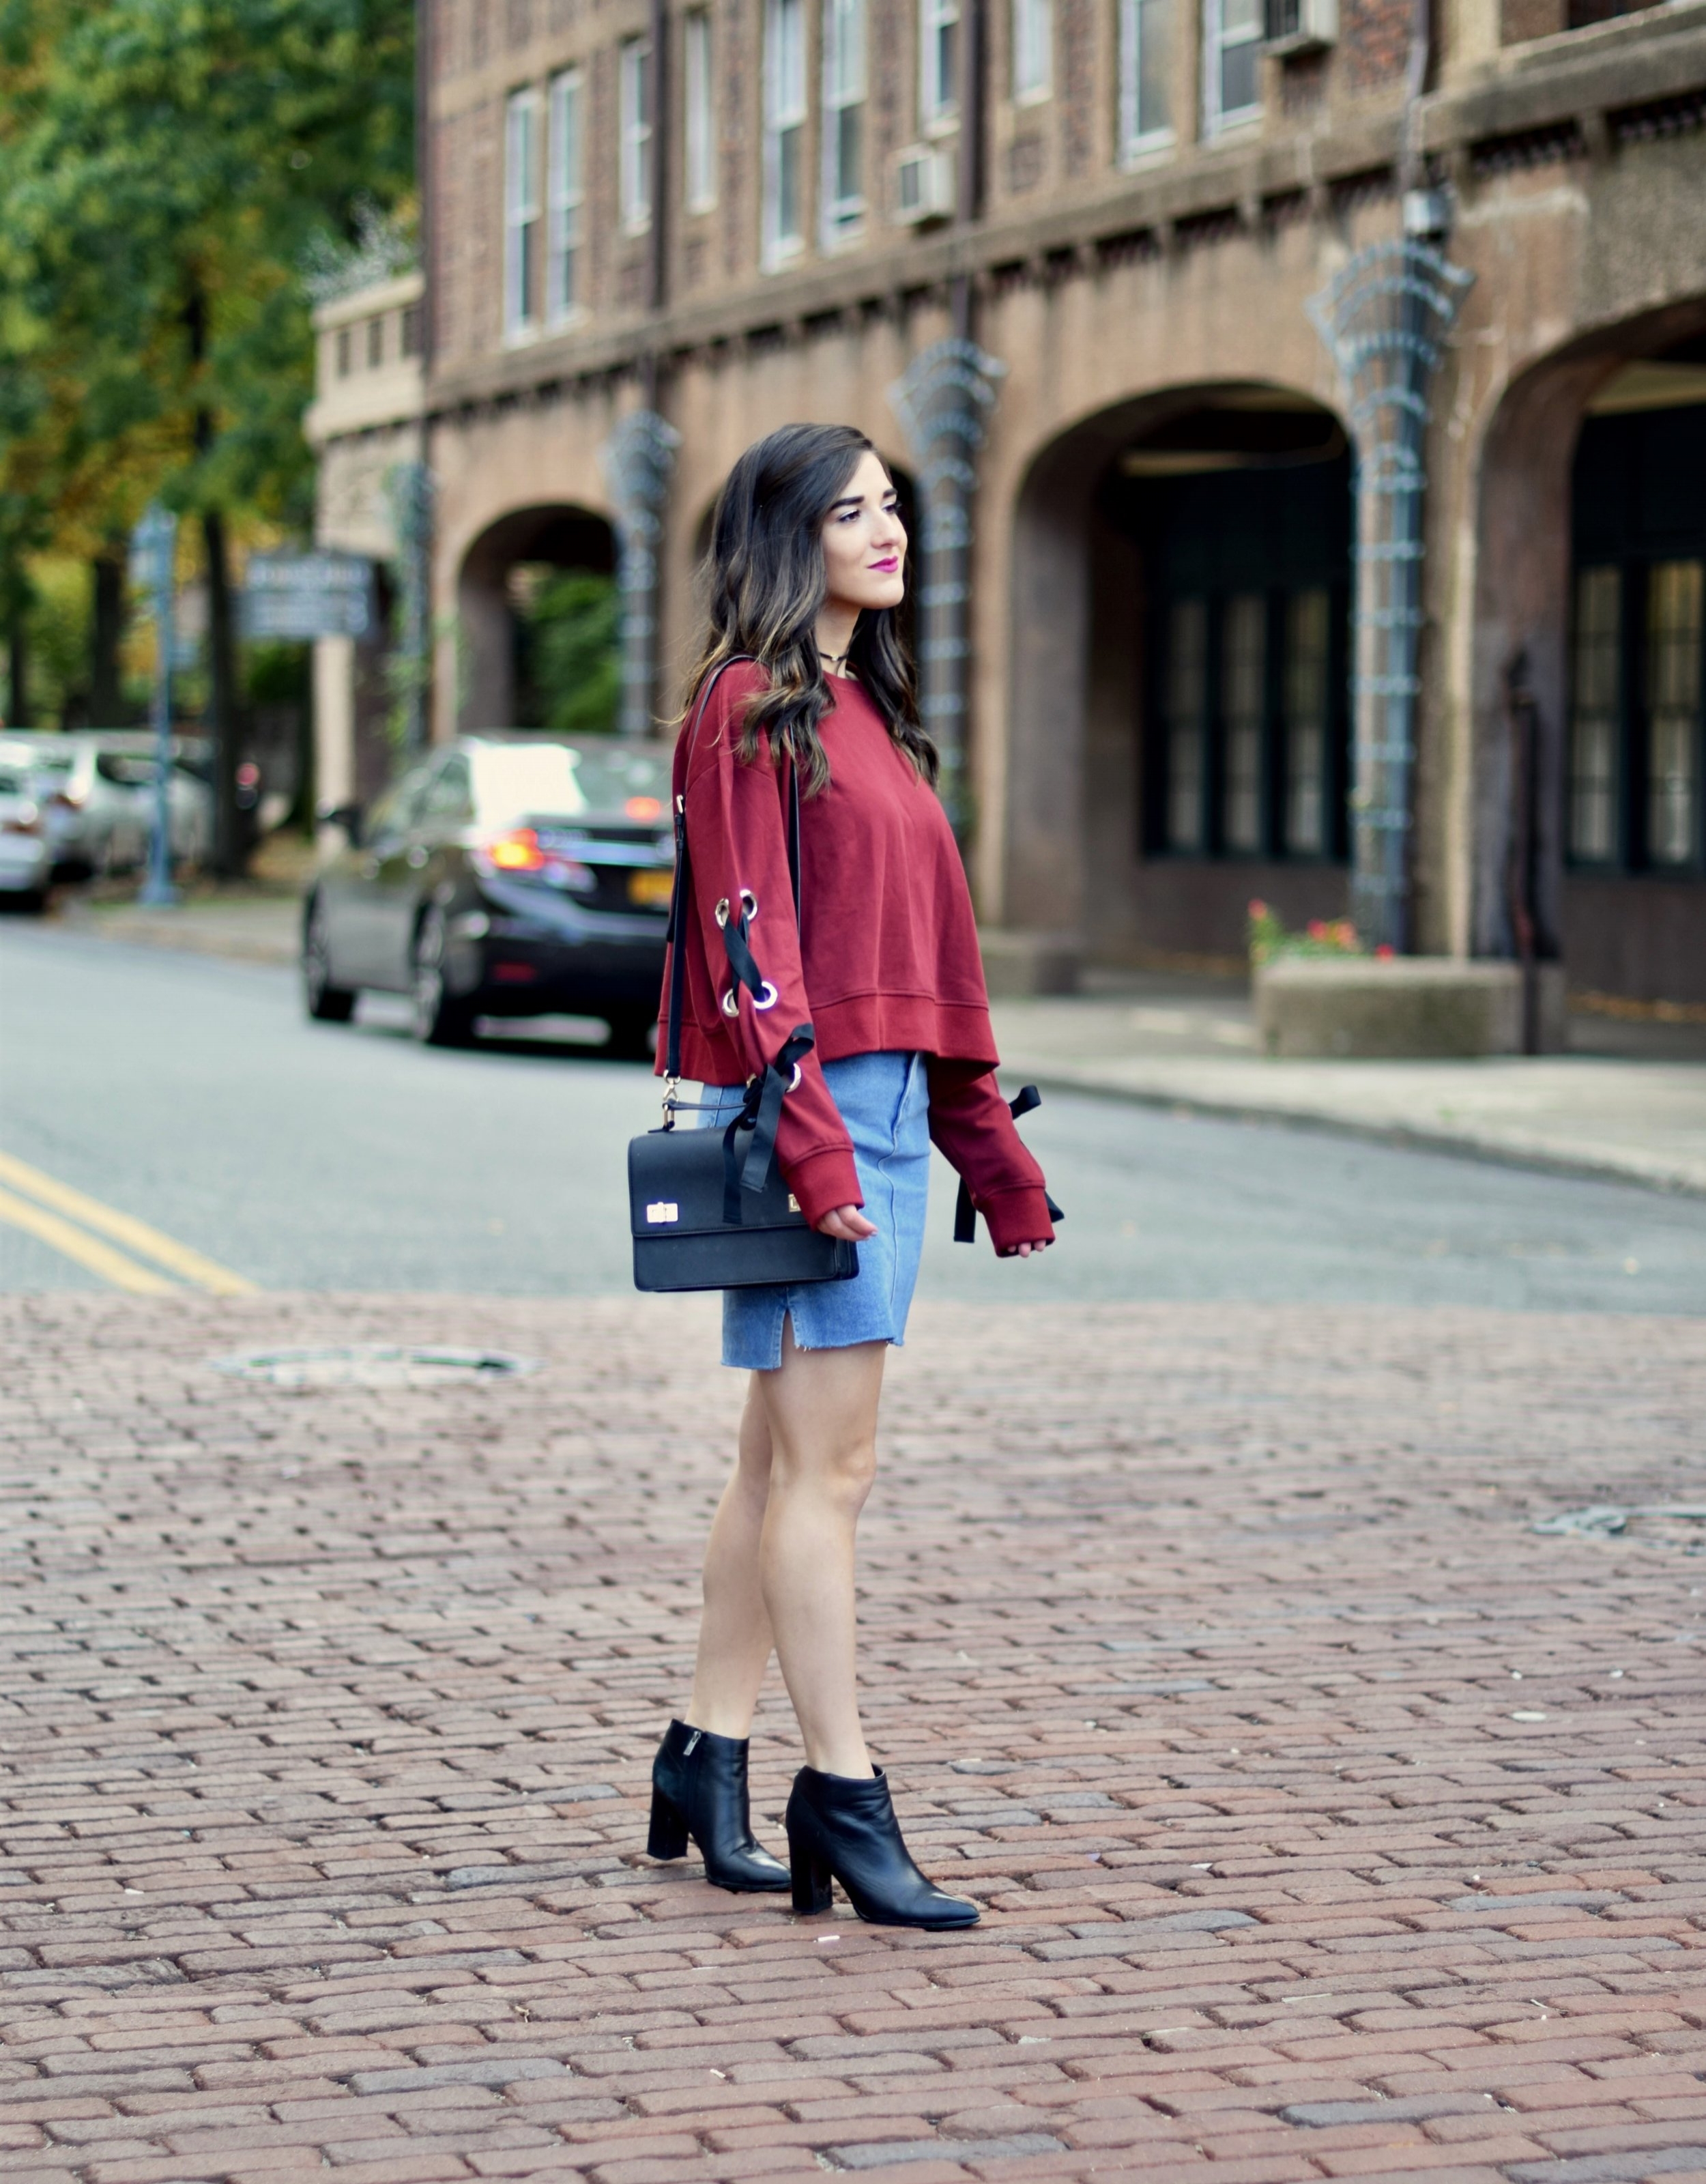 Red Lace-Up Sleeve Sweatshirt Denim Skirt 10 Things I'm Thankful For This Year Esther Santer Fashion Blog NYC Street Style Blogger Outfit OOTD Trendy Girl Women Choker Black Booties Hair Brunette Henri Bendel West  57th Schoolbag Winter Look Fall Shop.jpg